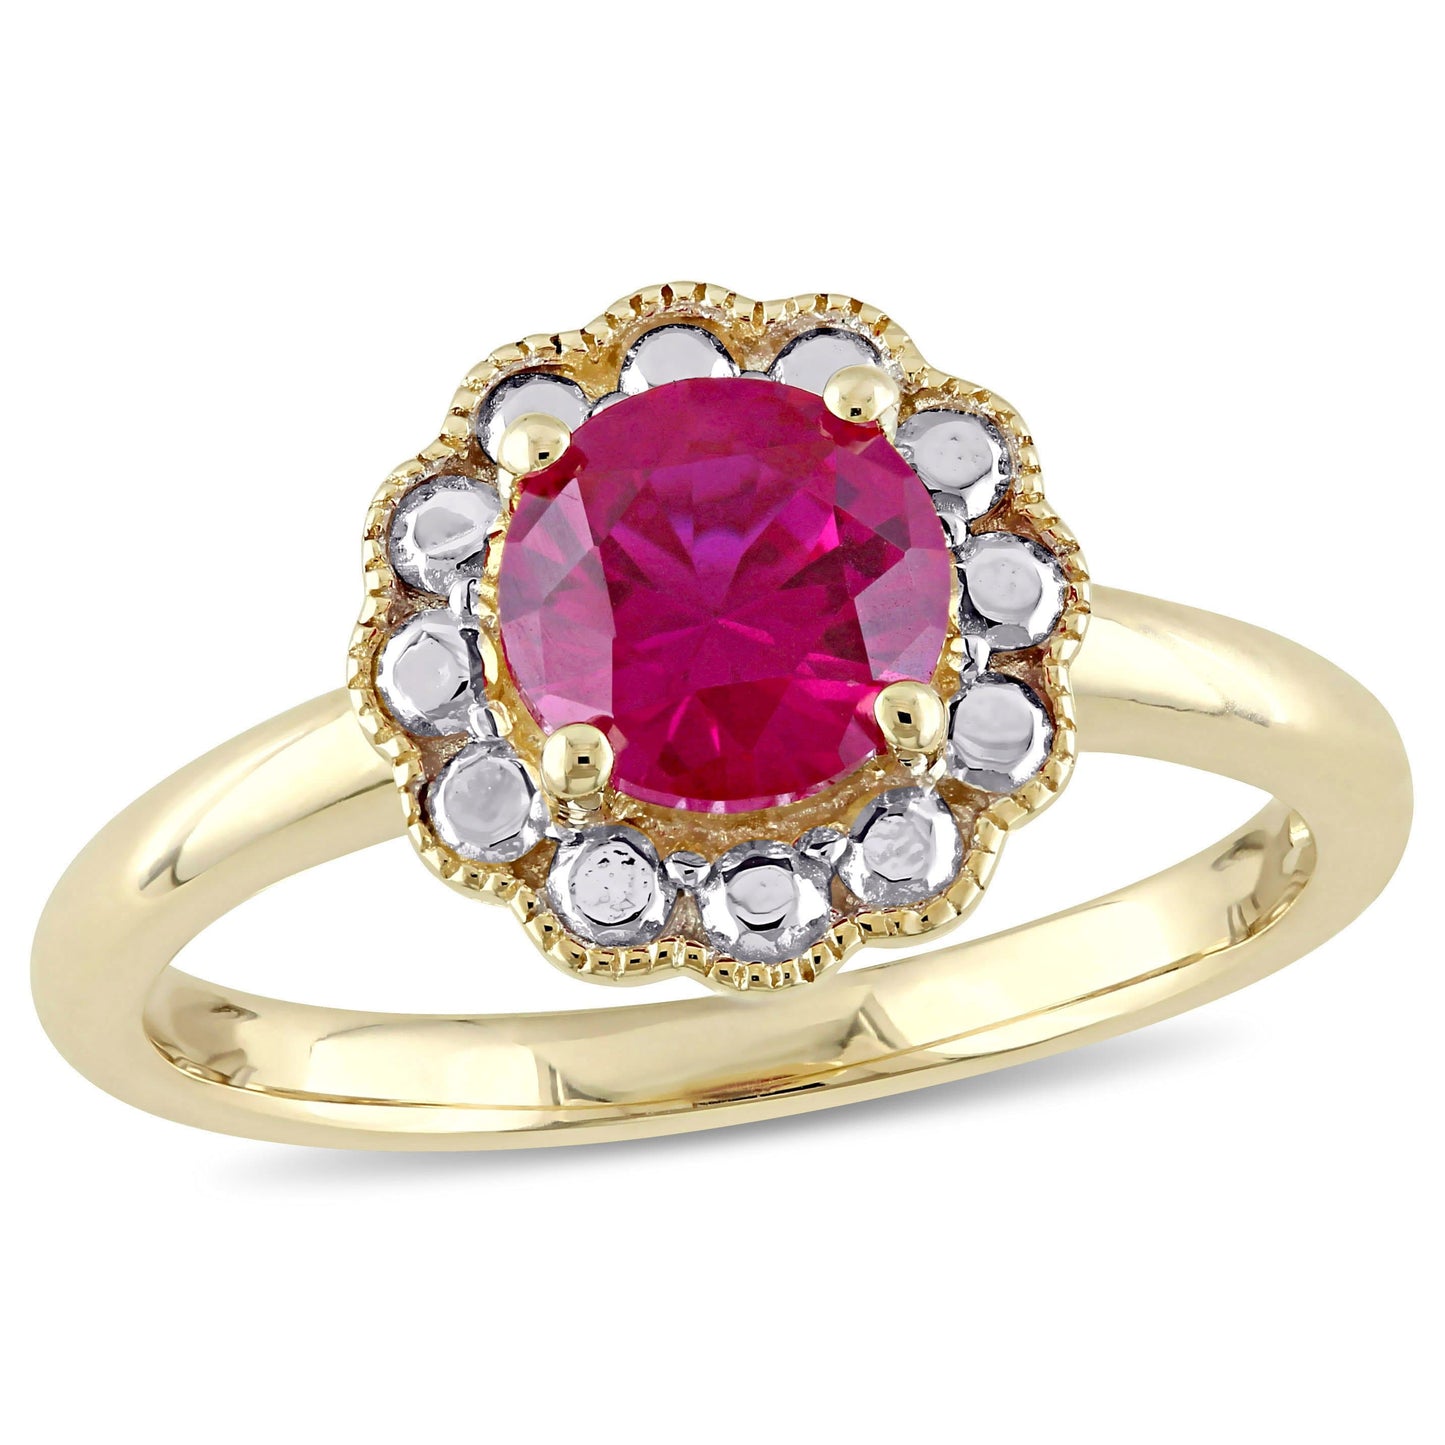 Sophia B 1 3/8ct Lab-Created Red Ruby Flower Themed Halo Ring